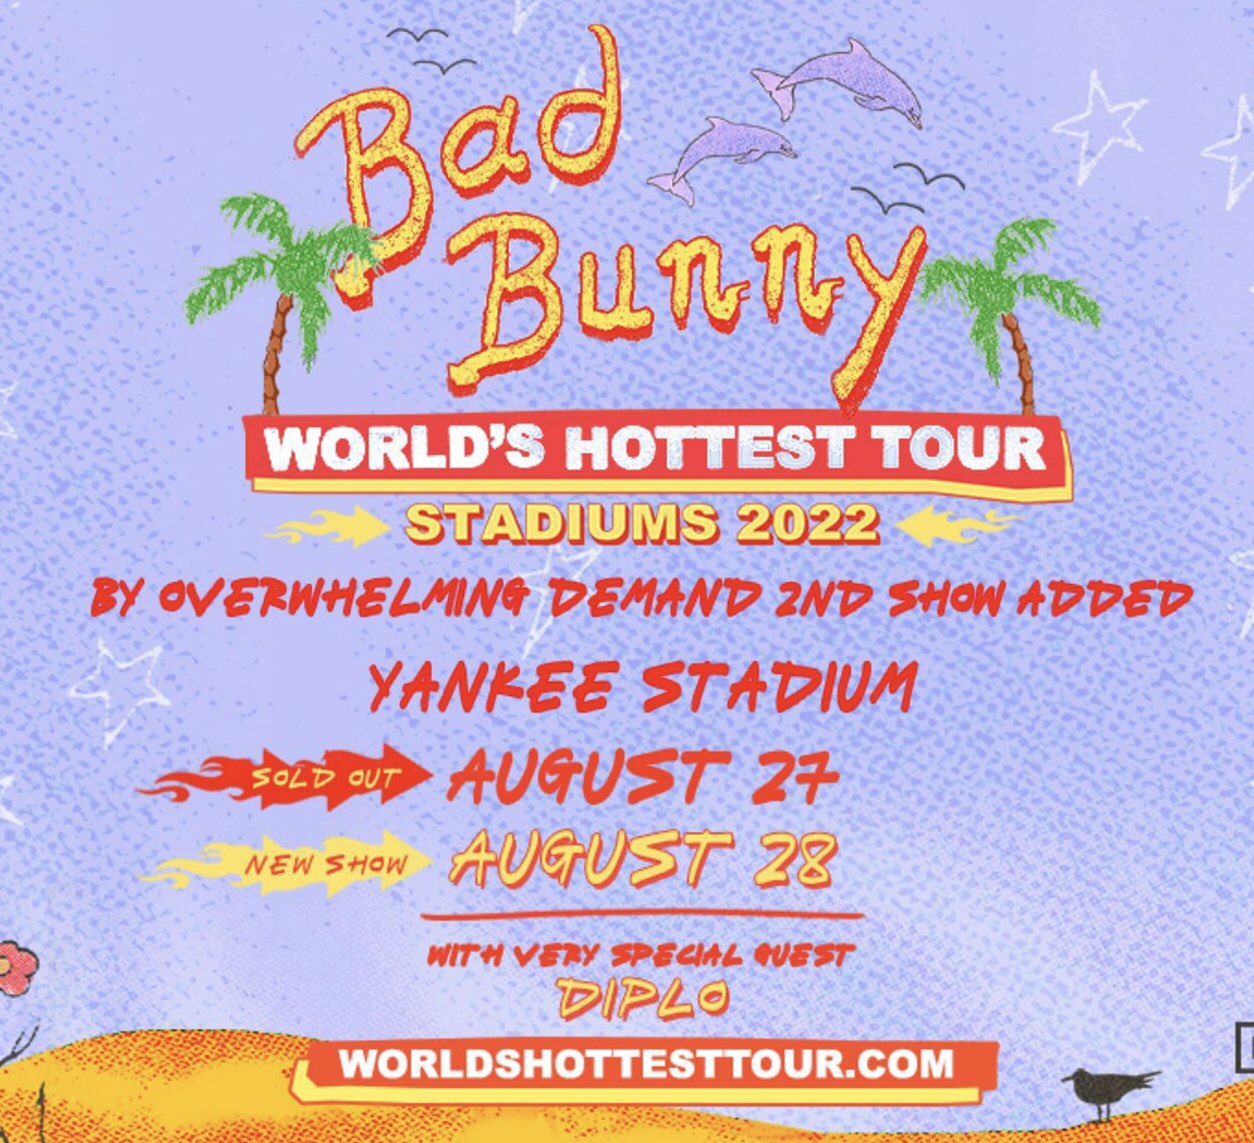 Bad Bunny Expands 'Hottest Tour' With Six Additional Stadium Shows -  Pollstar News